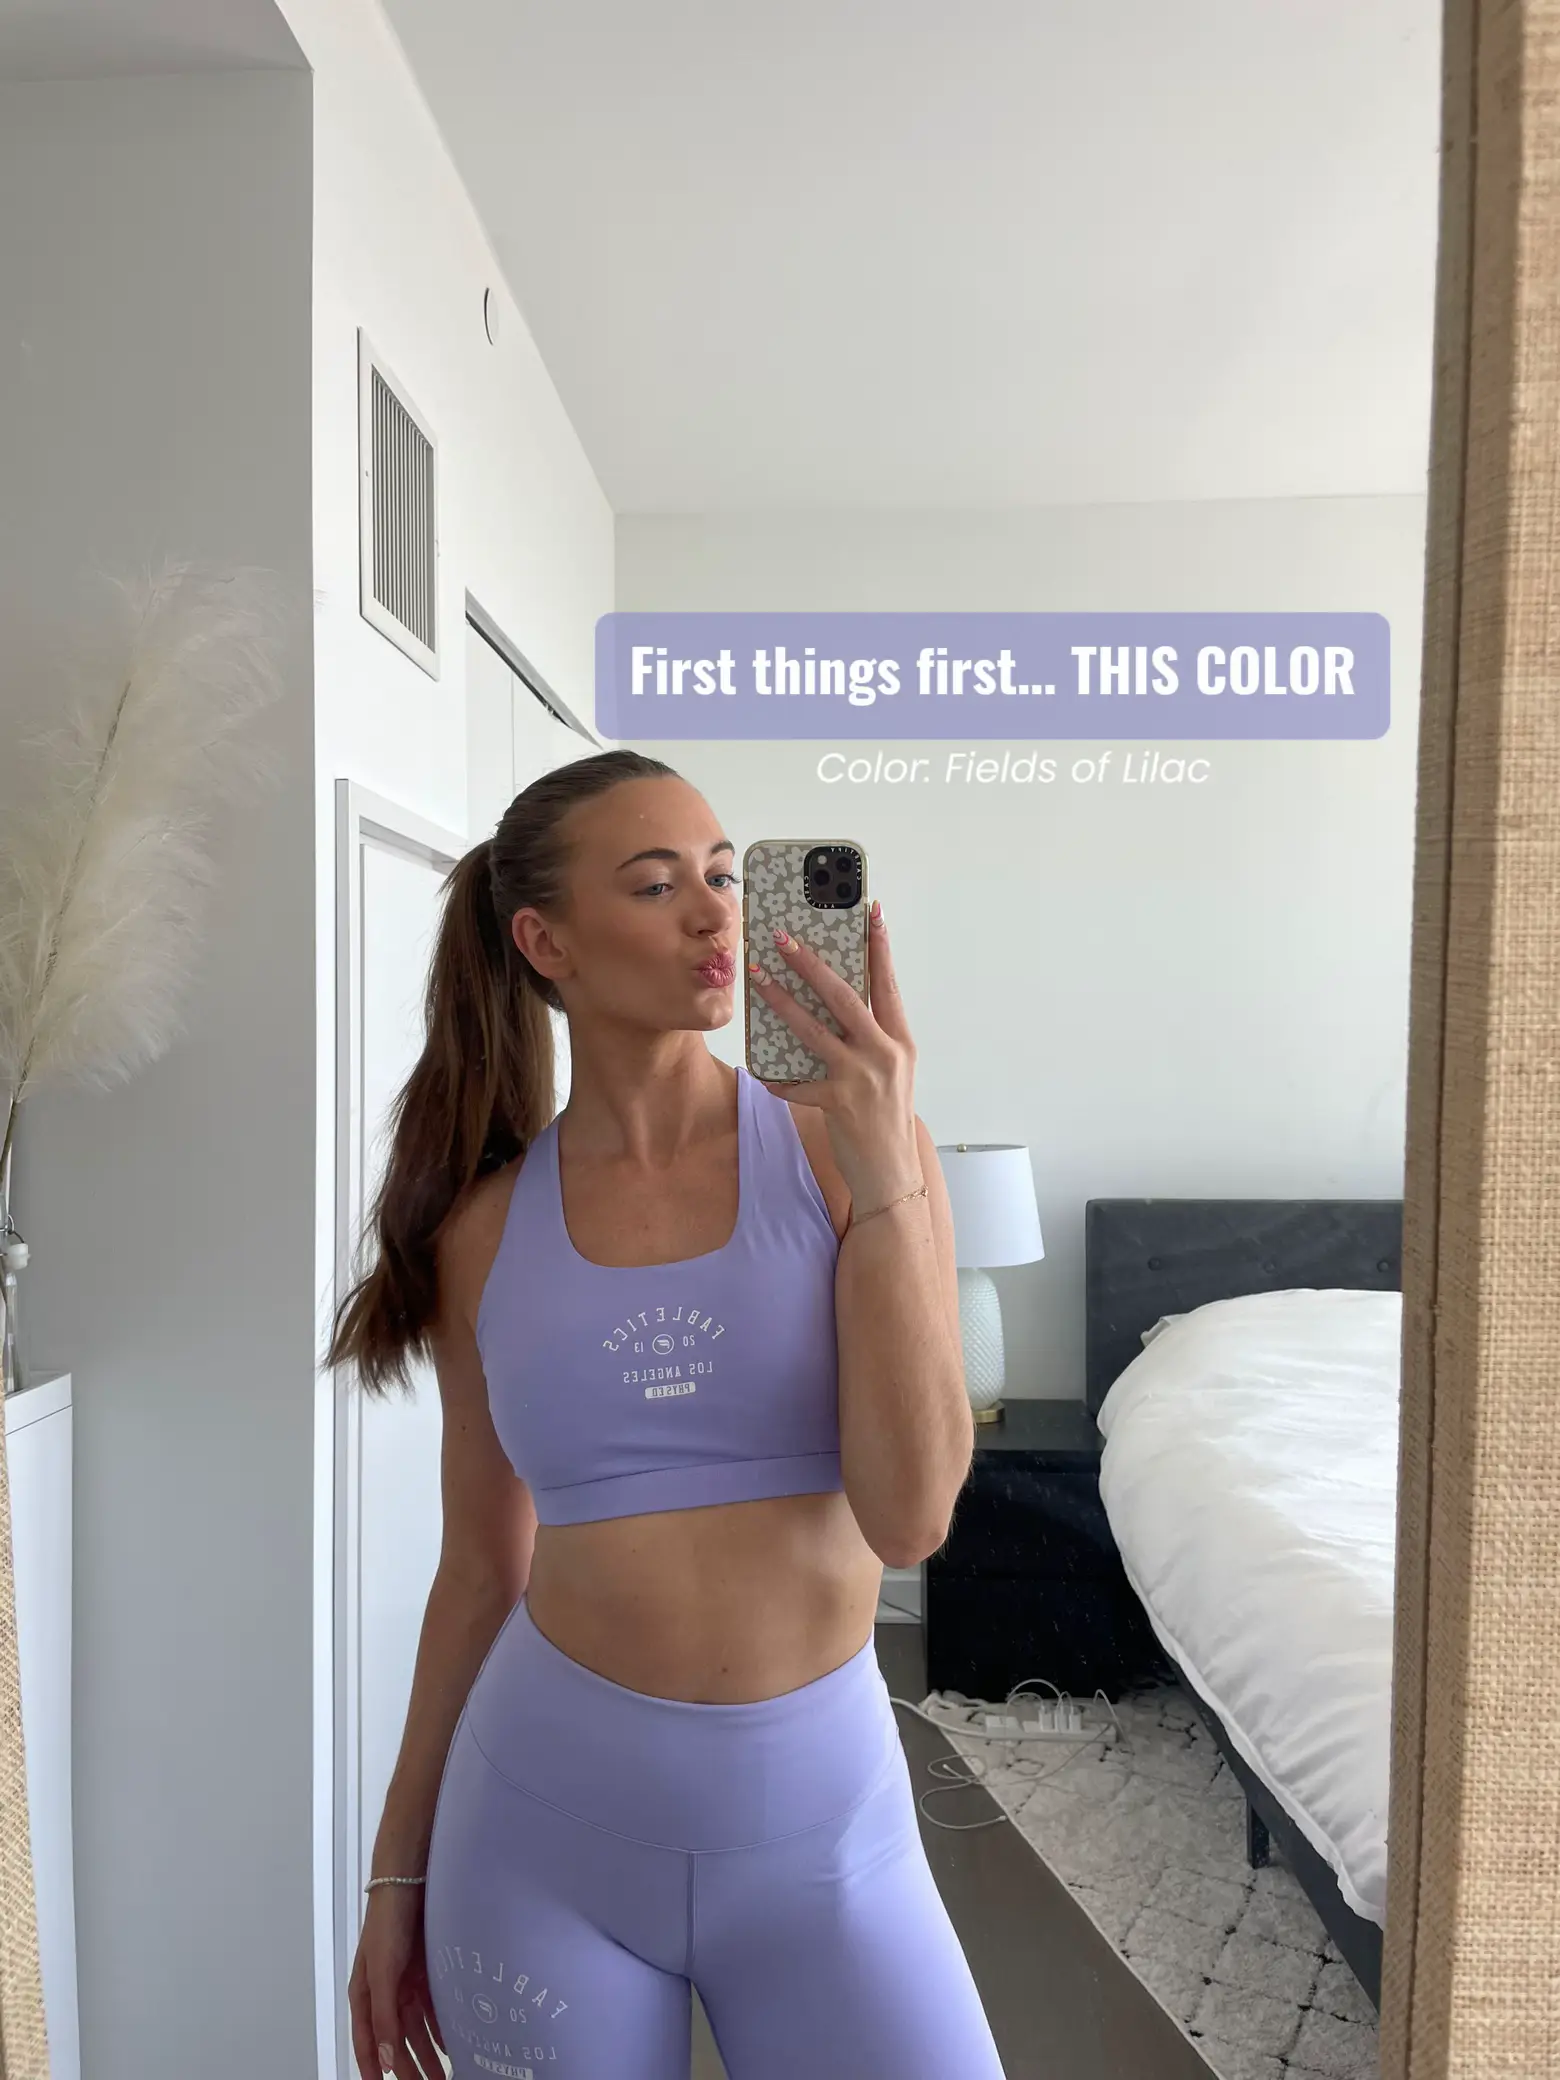 My outfits from fabletics & ratings, Gallery posted by DanielleHabash